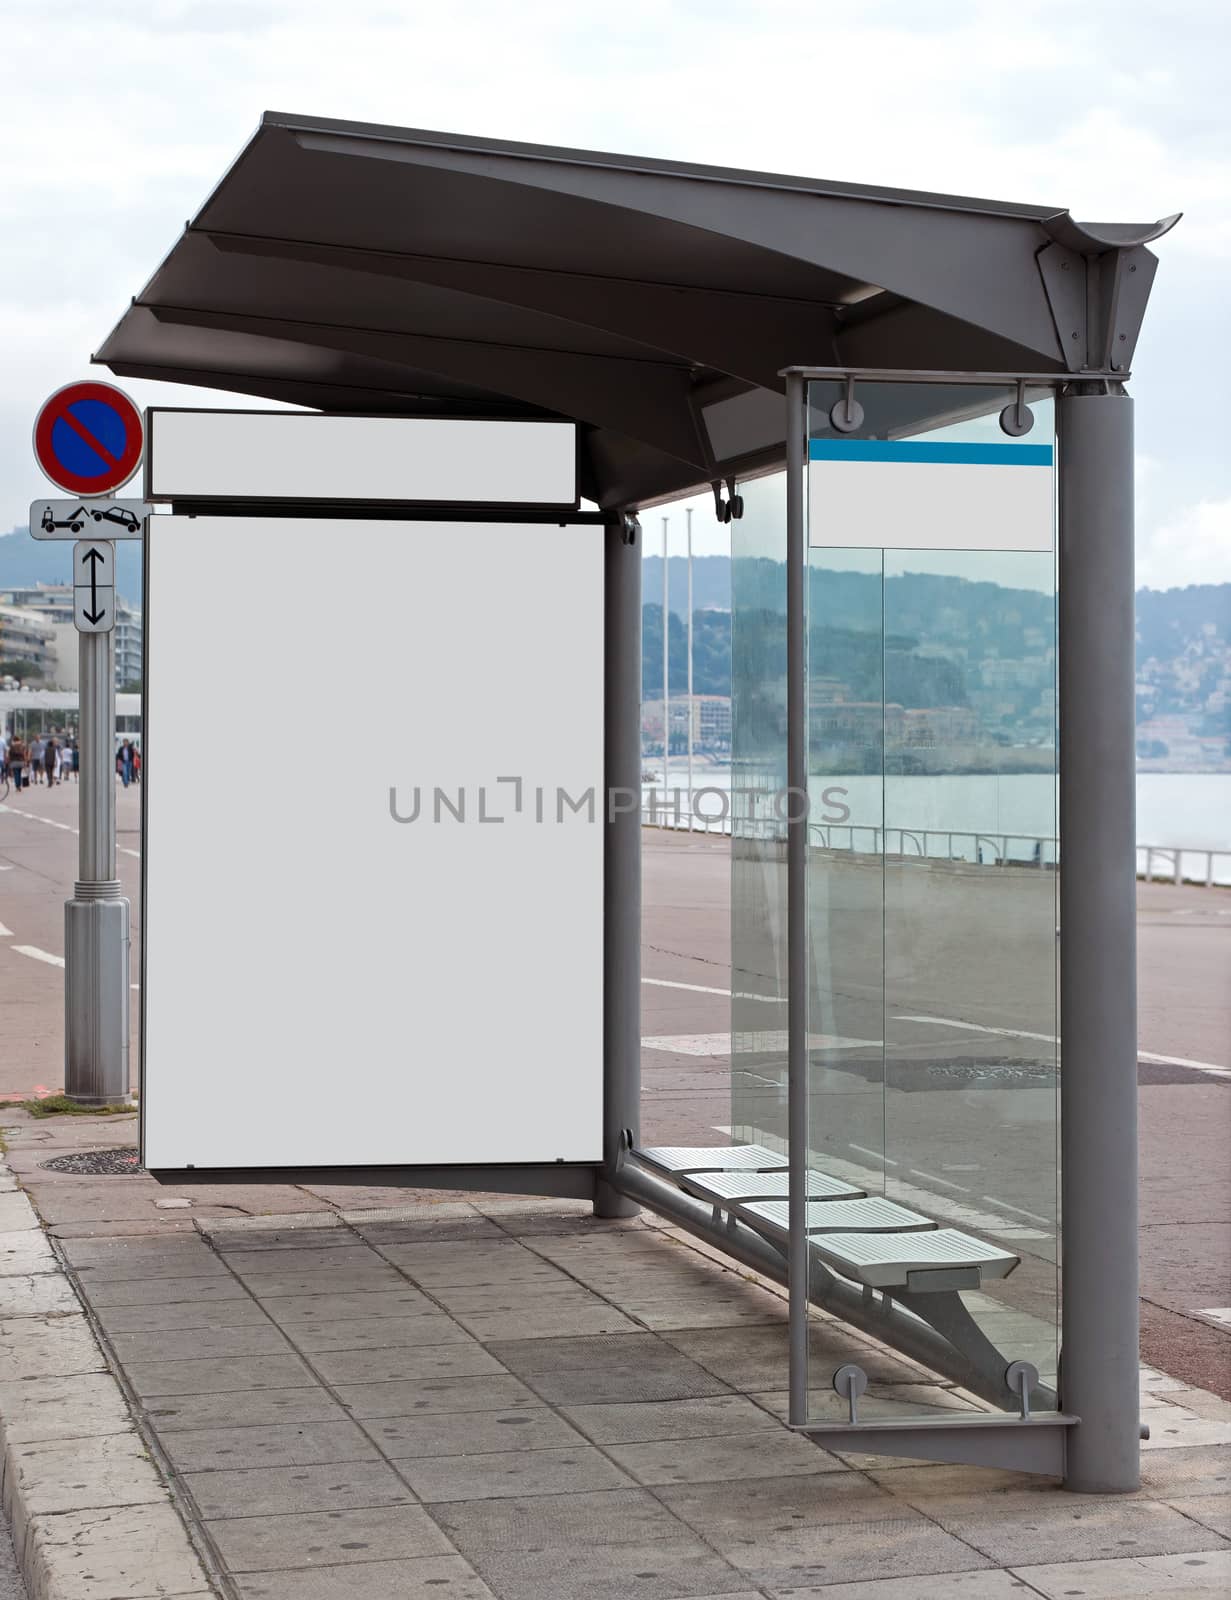 Blank Billboard on Bus Stop for your advertising situated (with work path) on Promenade Des Anglais, Nice, France.